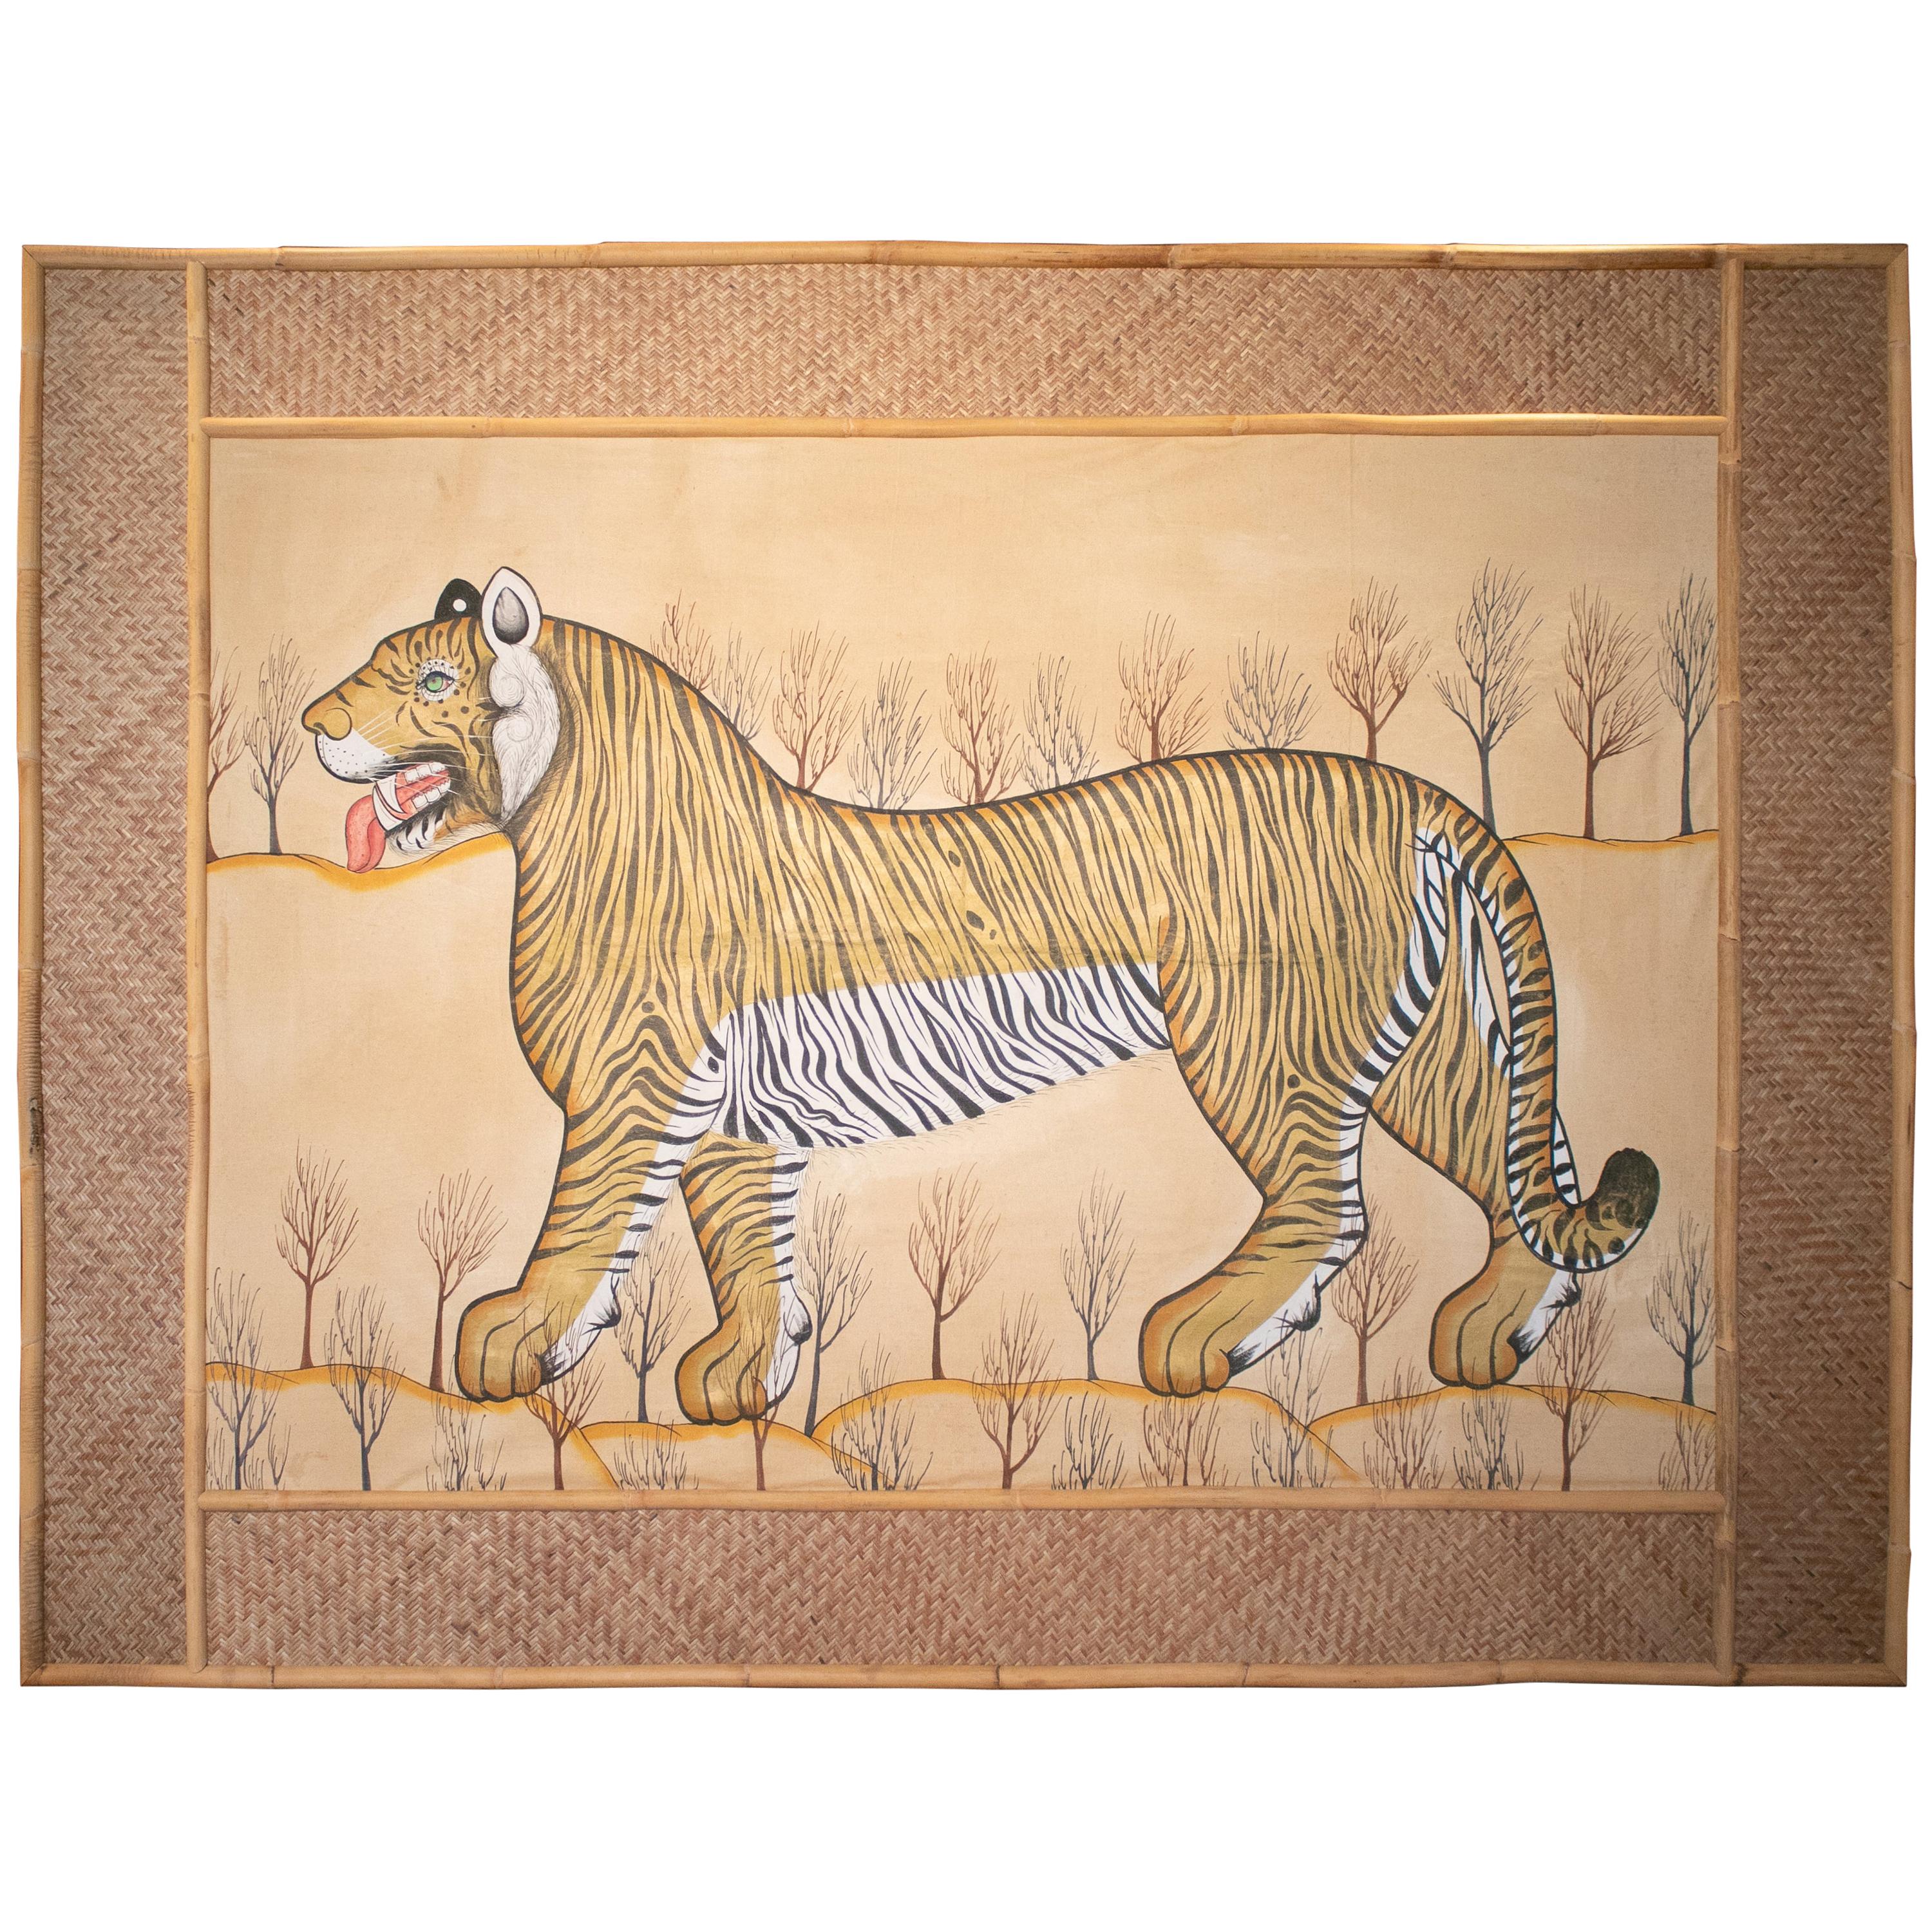 Jaime Parlade Designed Tiger Drawn on Fabric and Framed in Bamboo & Indian Straw